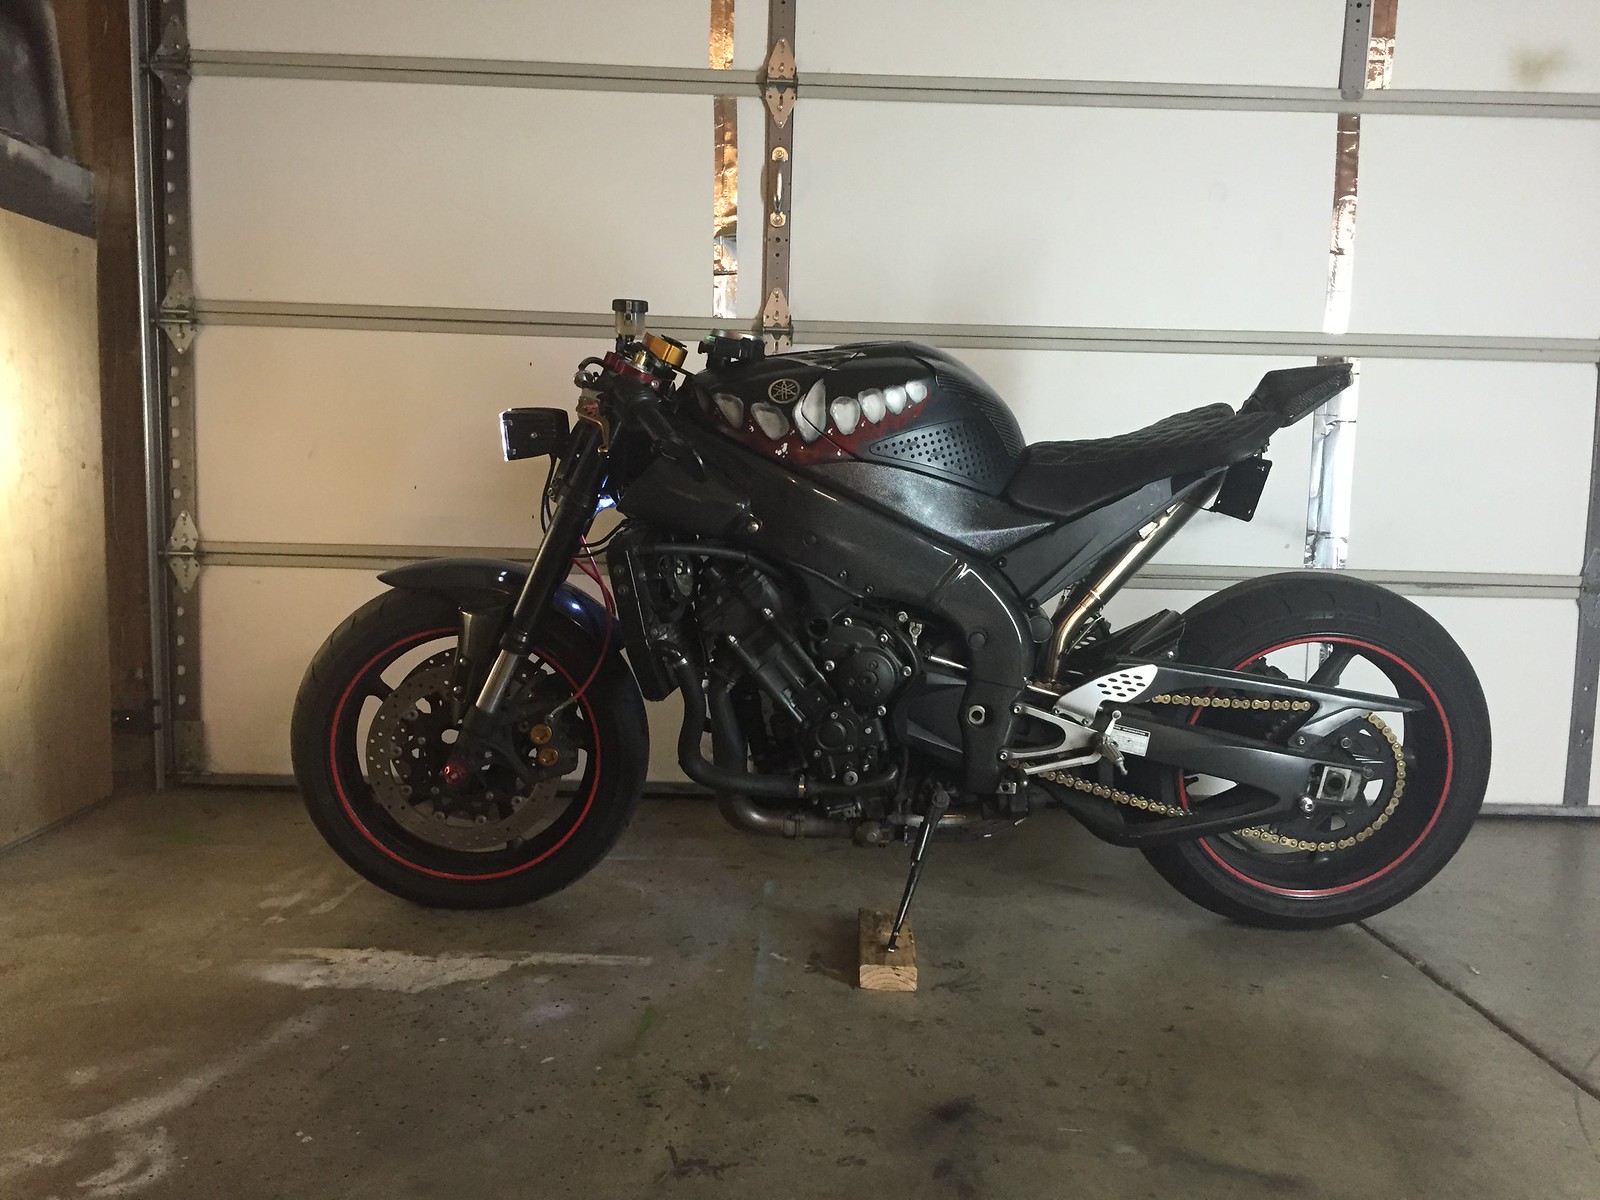 Here's the metamorphosis of my 2012 yamaha fz6r from the stock sport b...